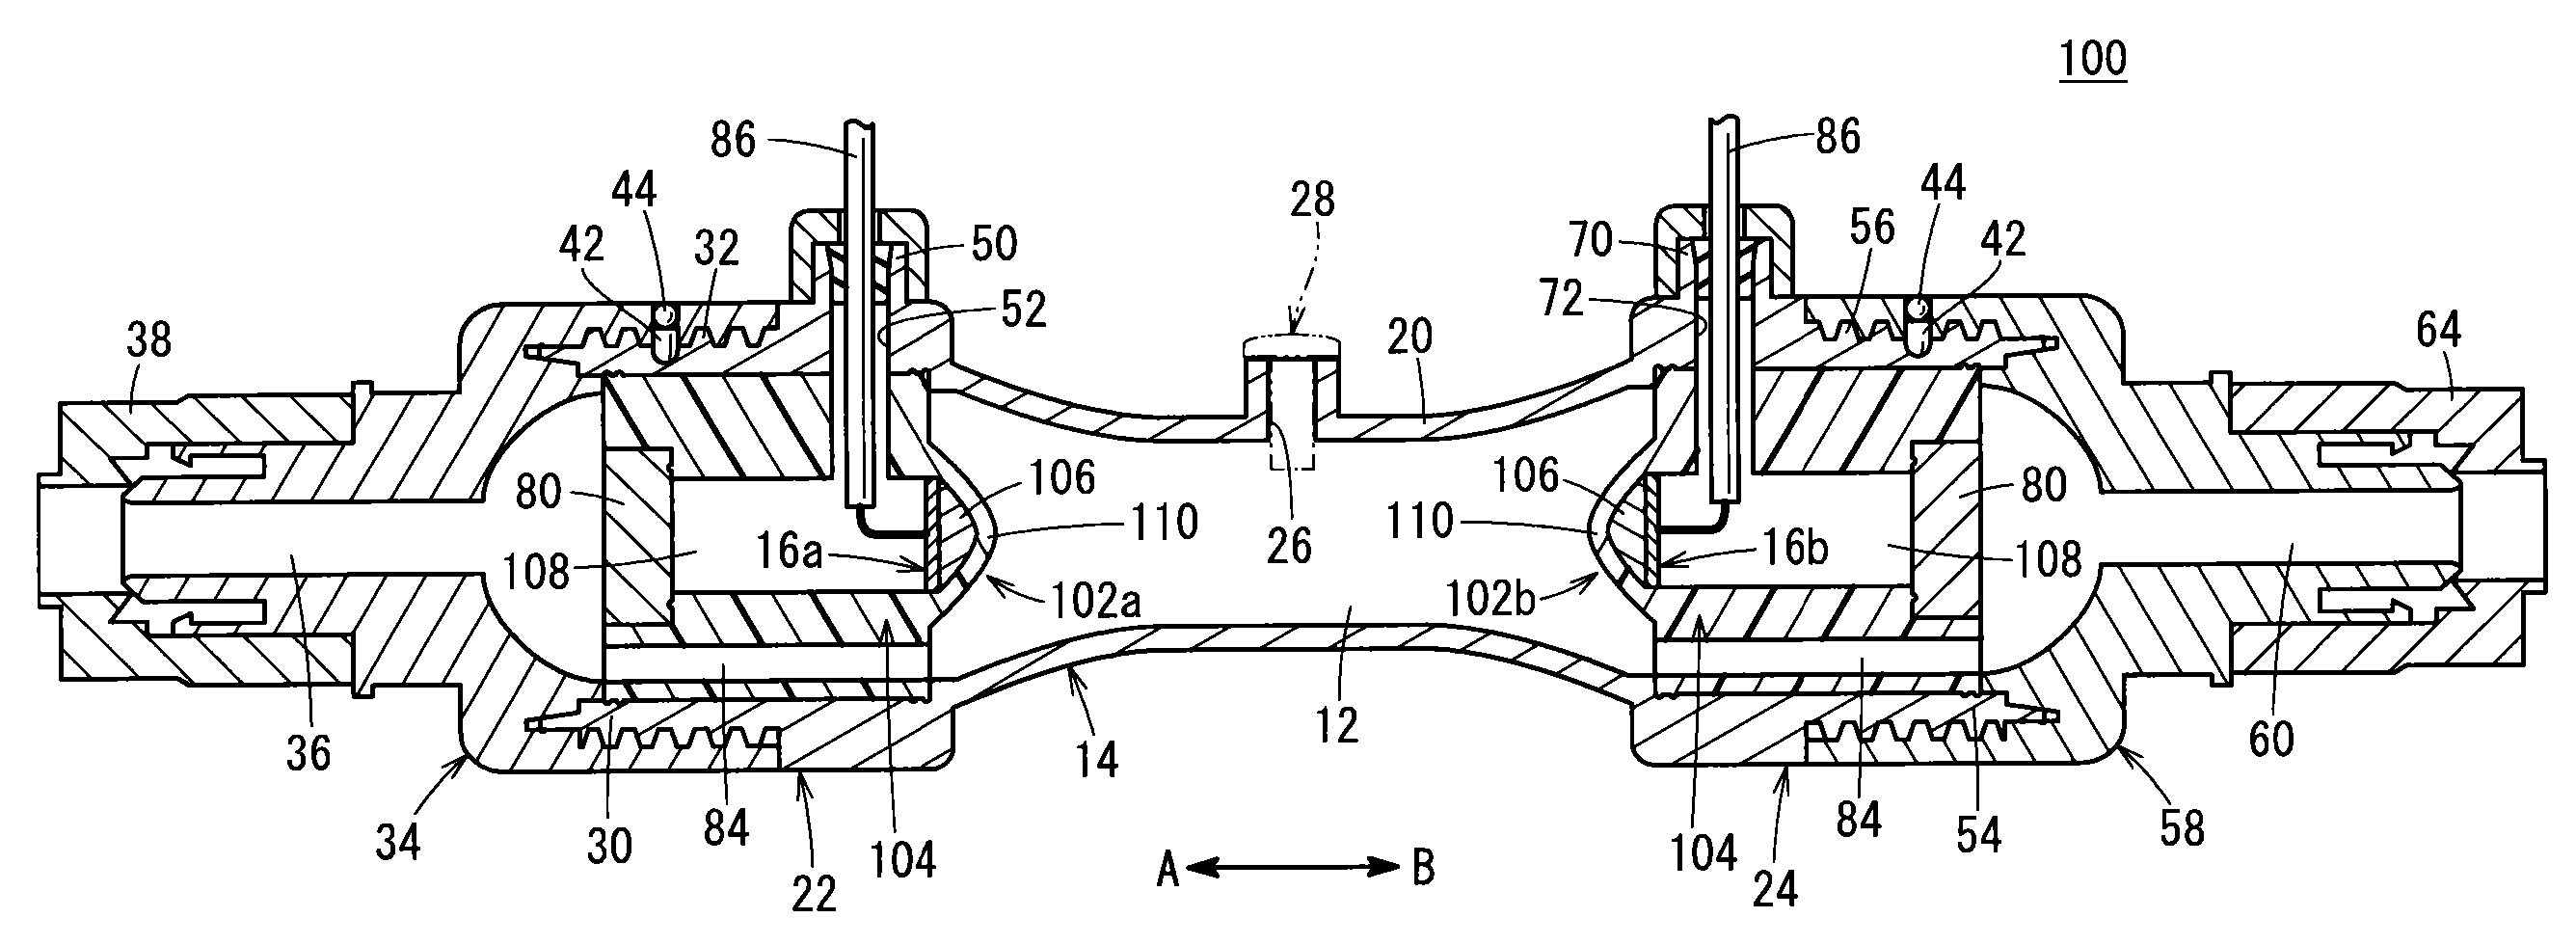 Ultrasonic flow meter having deterioration suppression in flow rate accuracy